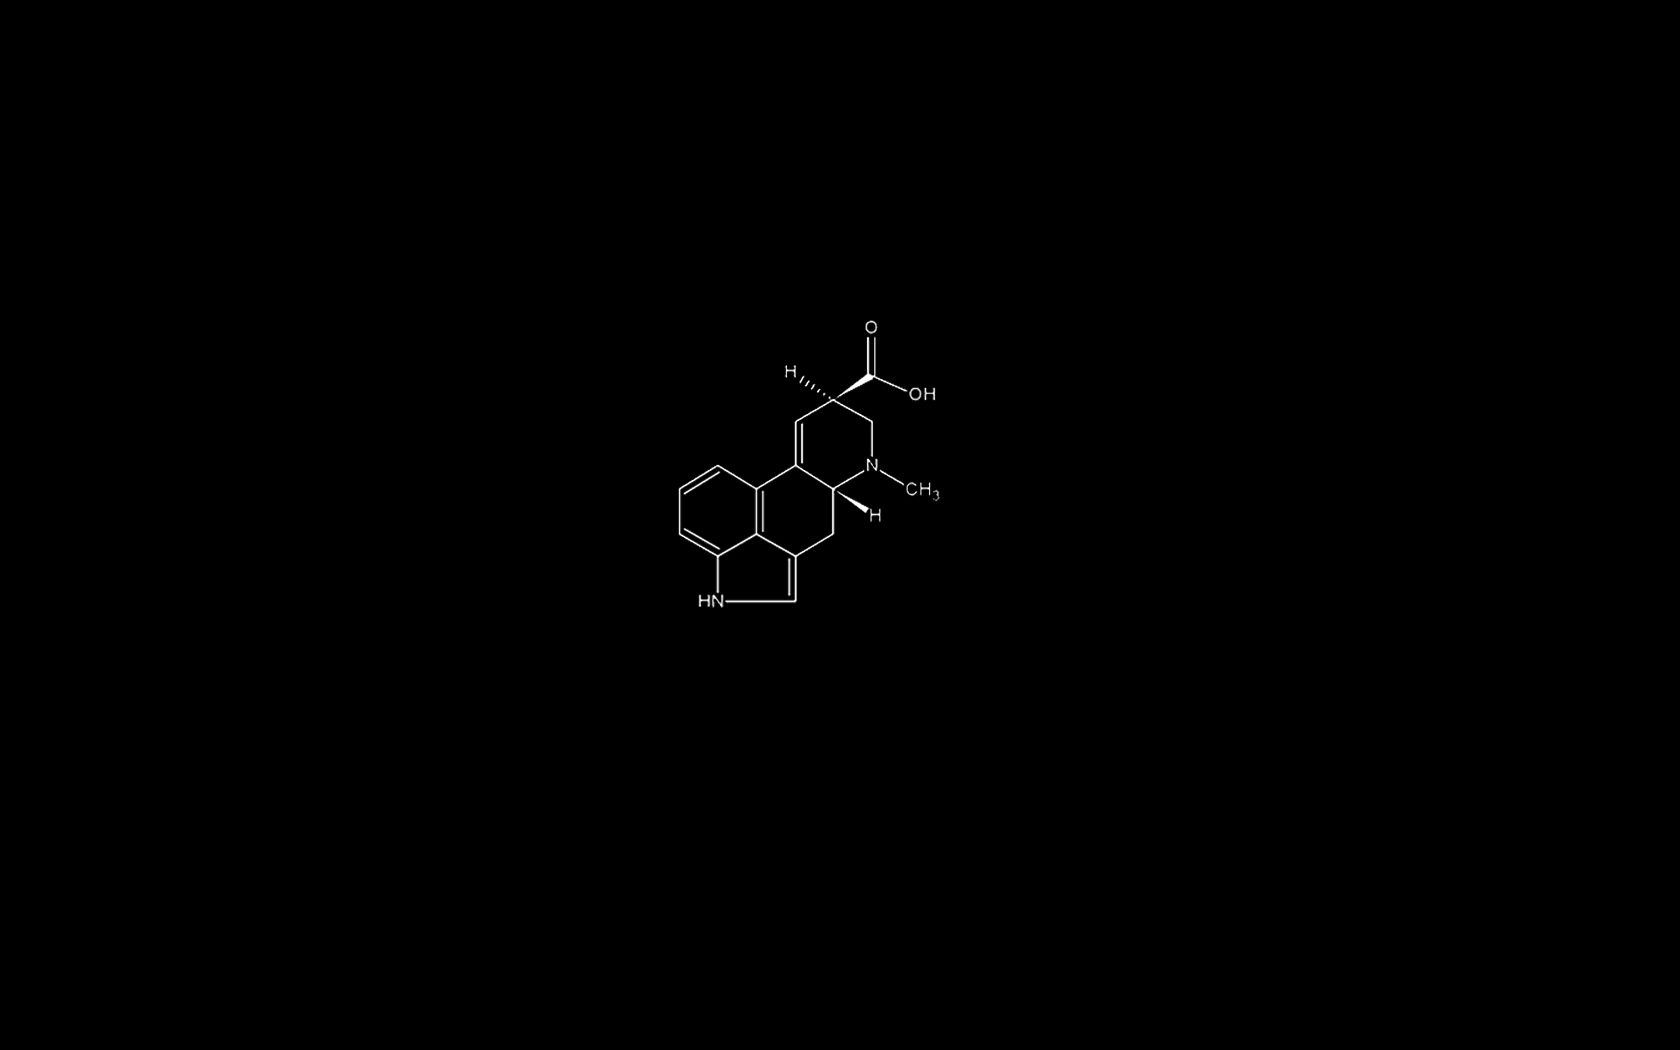 A chemical structure of a molecule is shown on a black background. - Chemistry